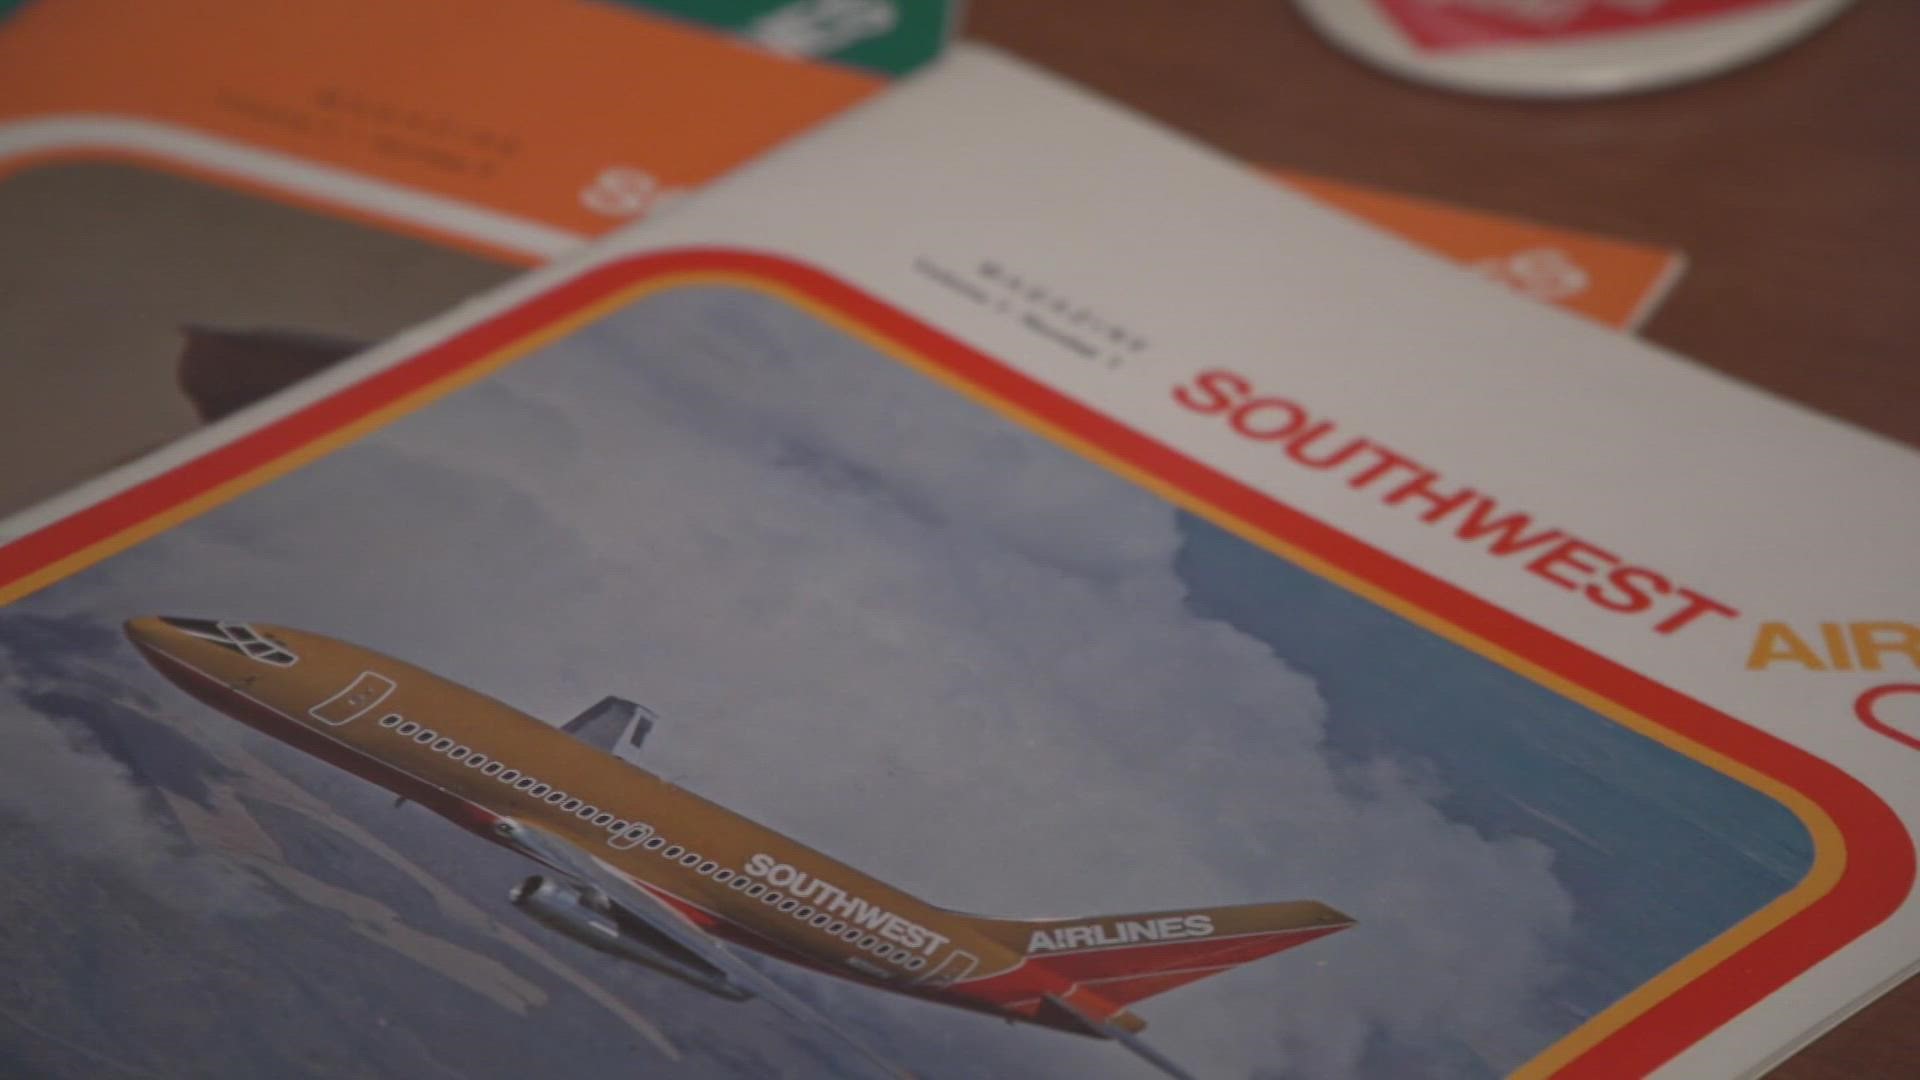 As the corporate historian, Richard West collects stuff that tells the story of Southwest Airlines.